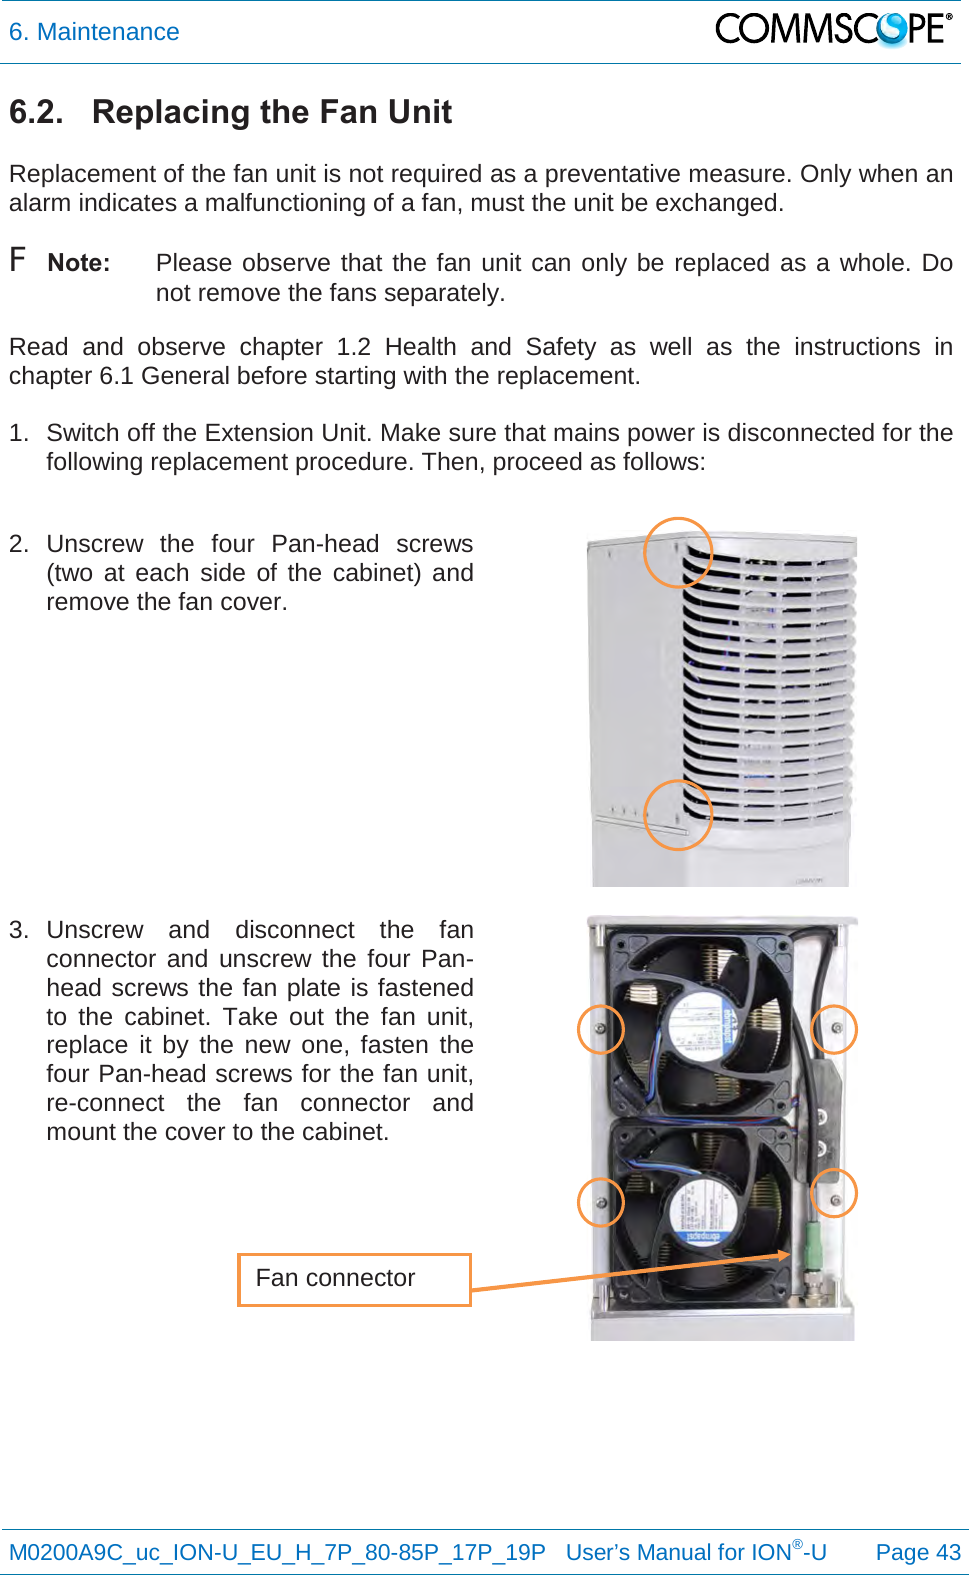 6. Maintenance   M0200A9C_uc_ION-U_EU_H_7P_80-85P_17P_19P   User’s Manual for ION®-U  Page 43  6.2.   Replacing the Fan Unit  Replacement of the fan unit is not required as a preventative measure. Only when an alarm indicates a malfunctioning of a fan, must the unit be exchanged. F Note: Please observe that the fan unit can only be replaced as a whole. Do not remove the fans separately. Read  and observe chapter  1.2 Health and Safety as well as the instructions in chapter 6.1 General before starting with the replacement.   1. Switch off the Extension Unit. Make sure that mains power is disconnected for the following replacement procedure. Then, proceed as follows:  2.  Unscrew  the four Pan-head  screws (two at each side of the cabinet) and remove the fan cover.     3. Unscrew and disconnect the fan connector and unscrew the four Pan-head screws the fan plate is fastened to the cabinet. Take out the fan unit, replace it by the new one, fasten the four Pan-head screws for the fan unit, re-connect the fan connector and mount the cover to the cabinet.       Fan connector 